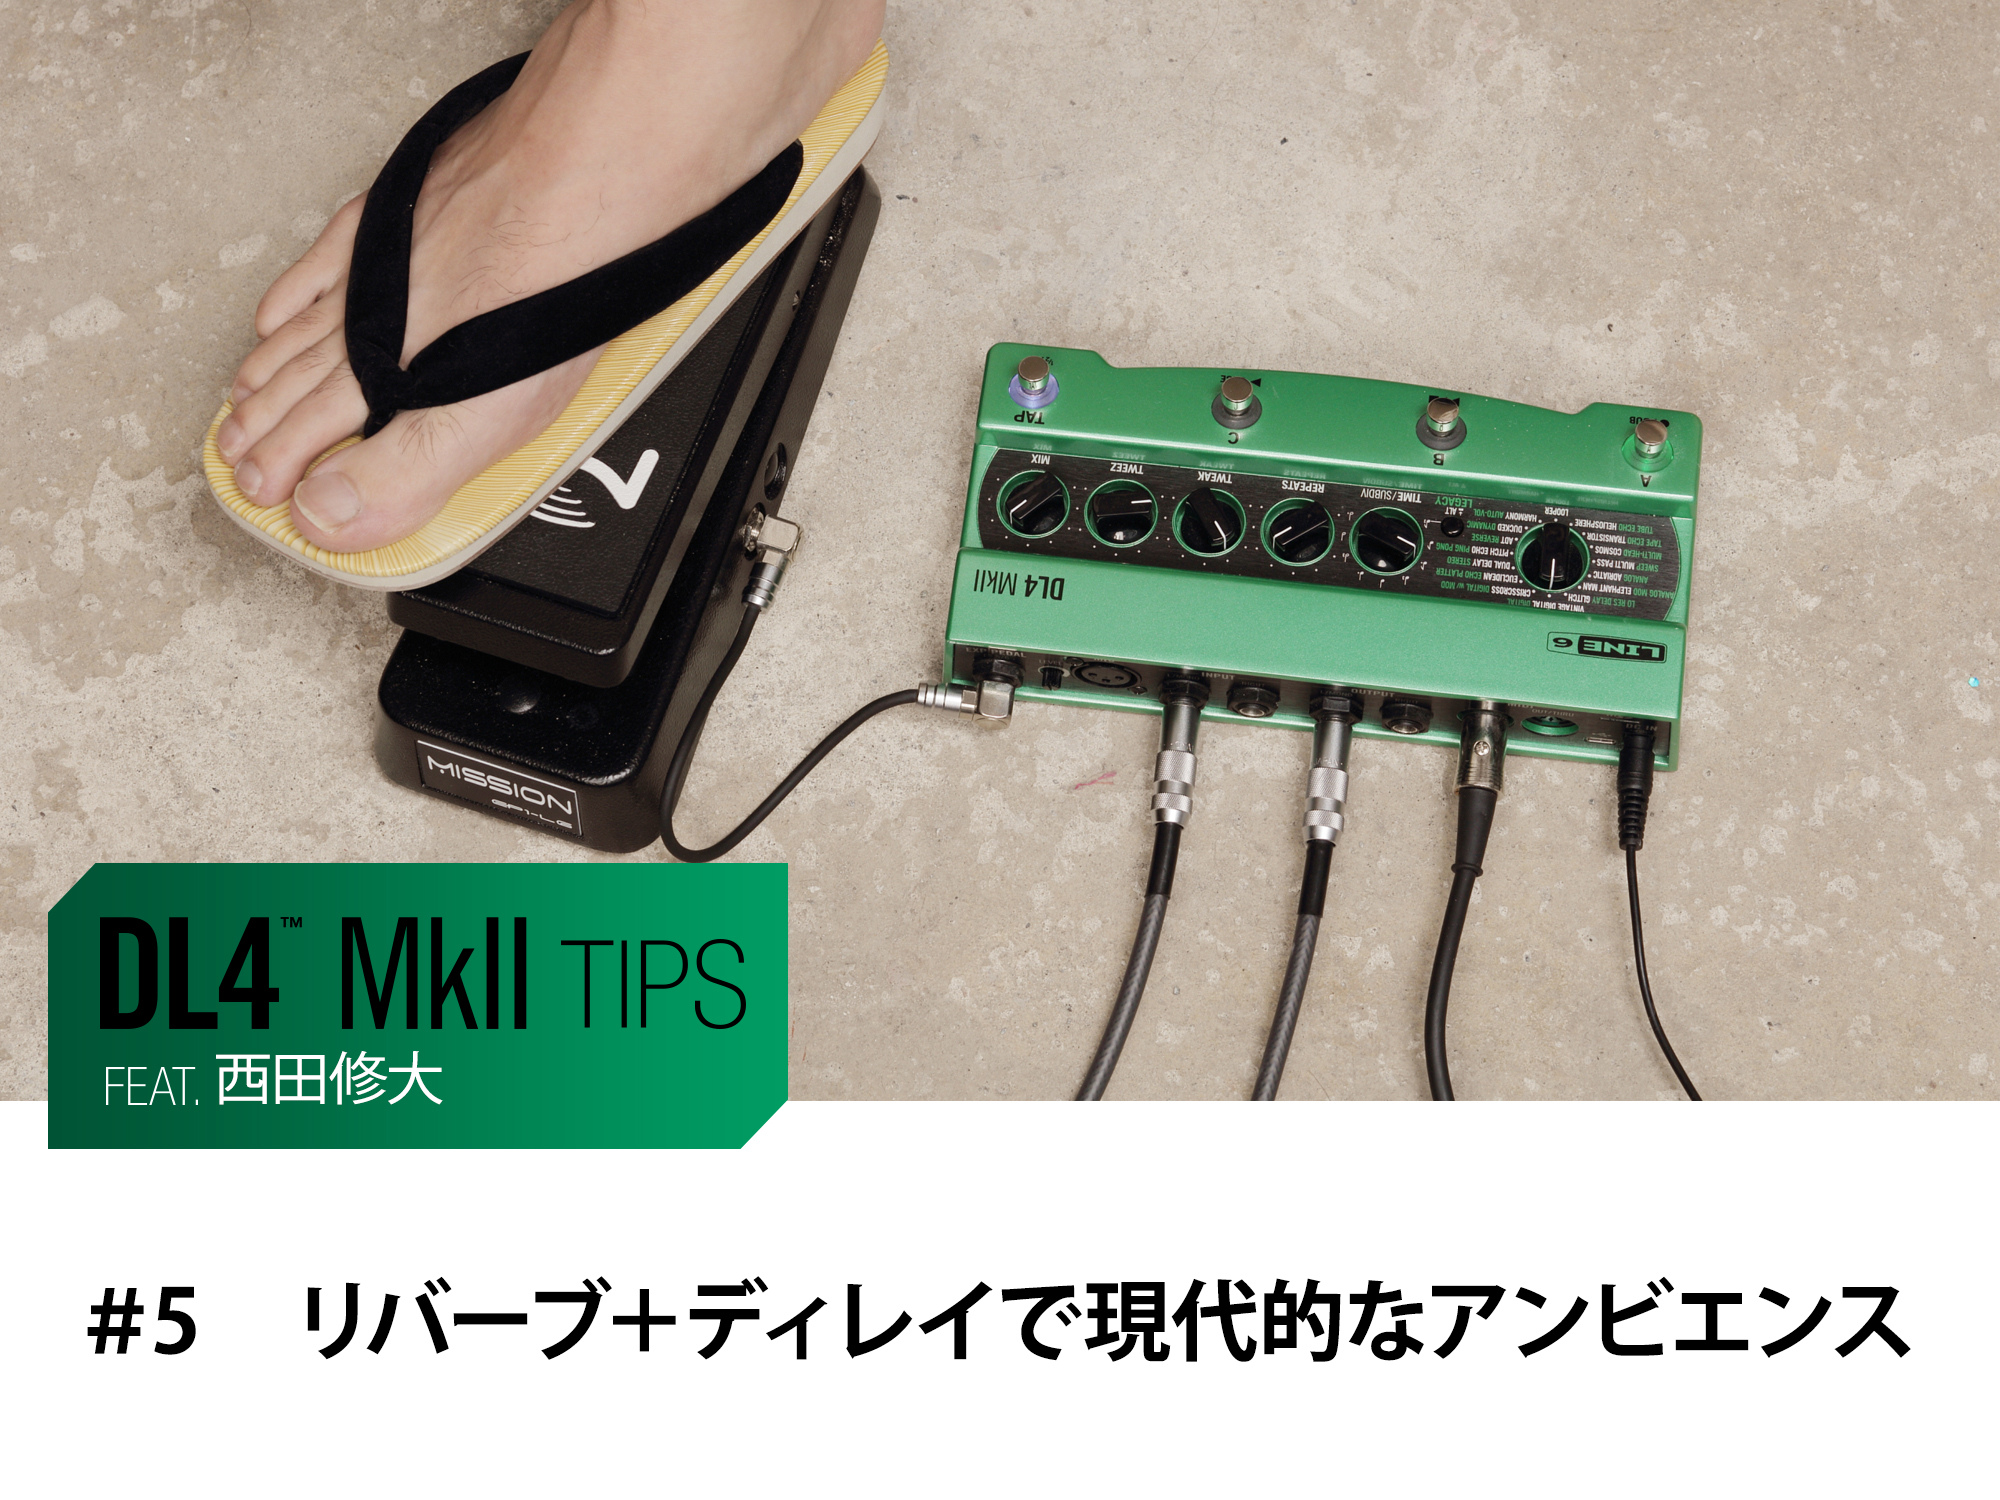 DL4 MkII Tips　第5回　feat.西田修大